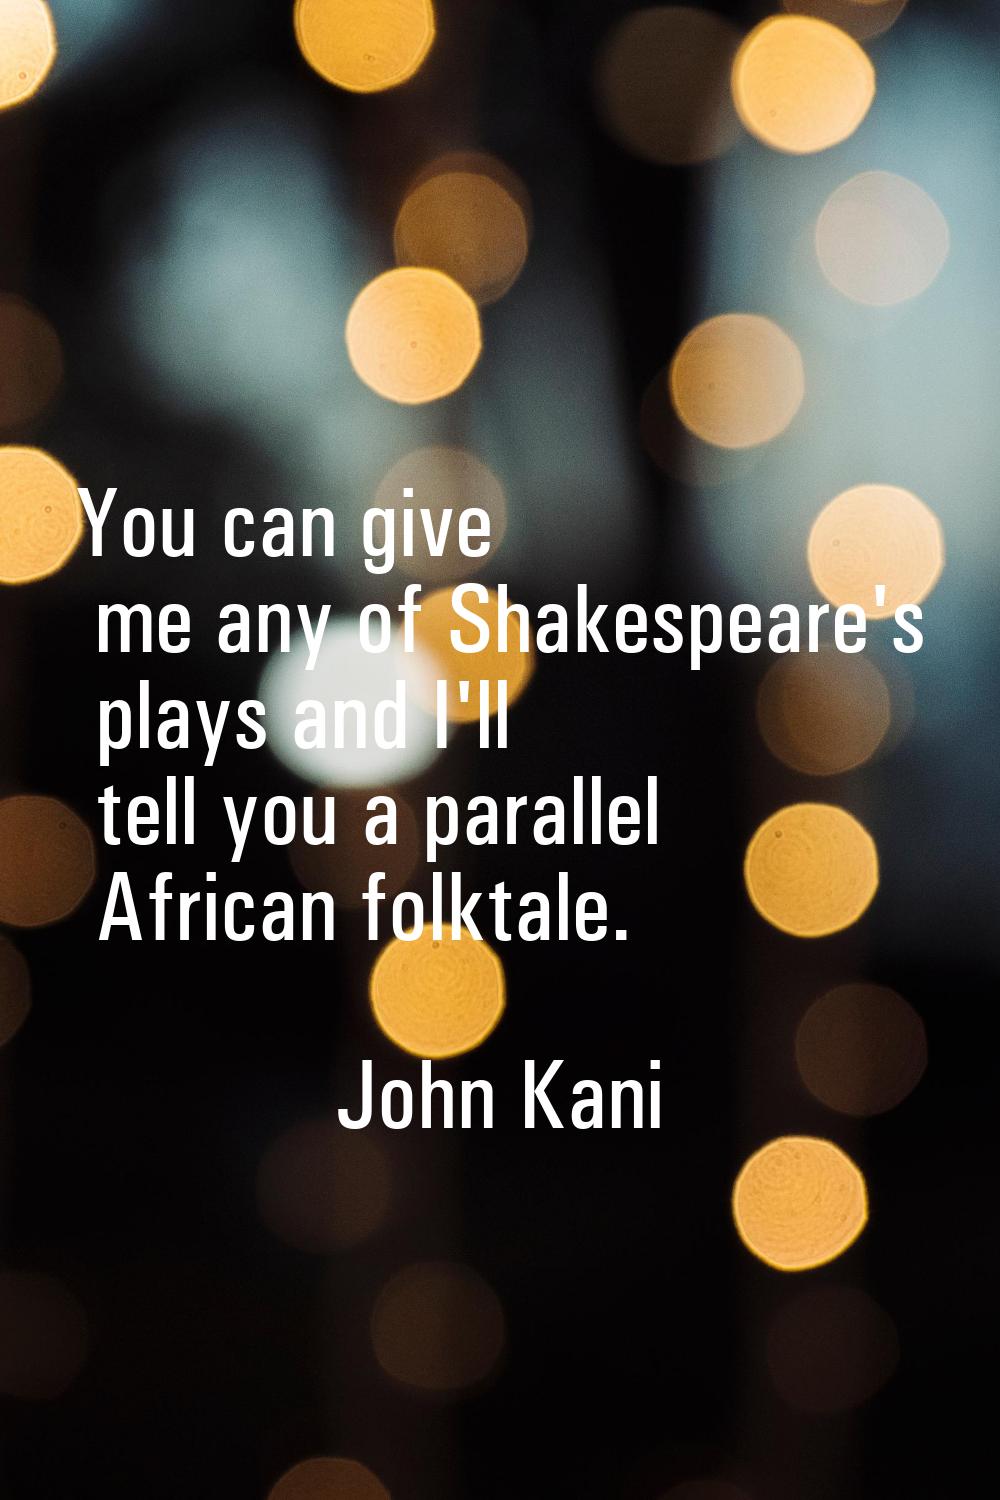 You can give me any of Shakespeare's plays and I'll tell you a parallel African folktale.